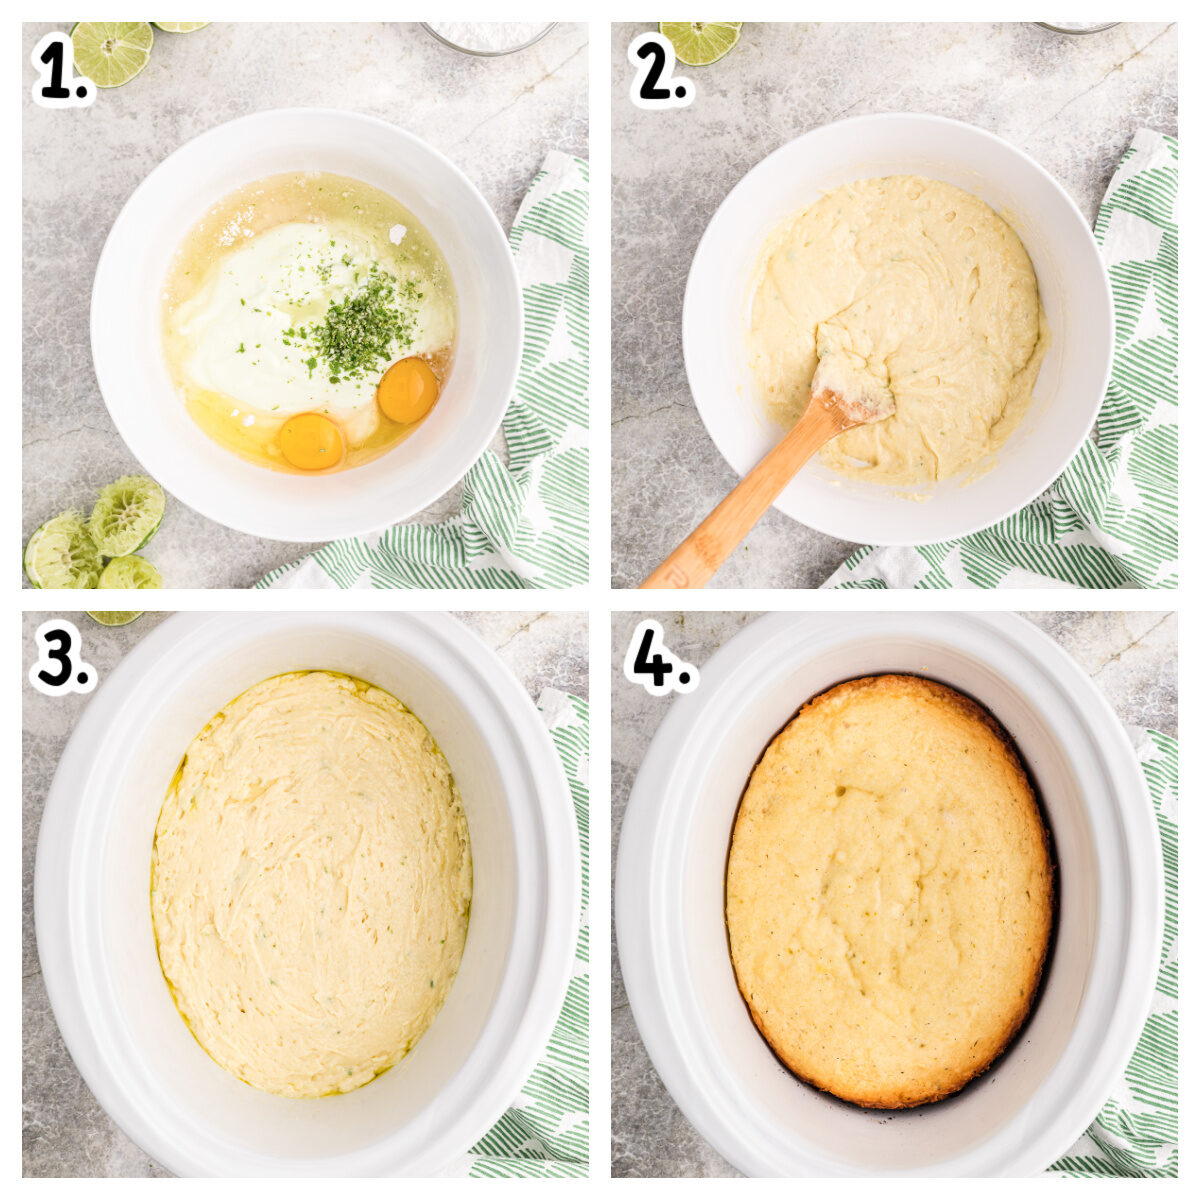 4 images showing how to make batter for cake and add to slow cooker.